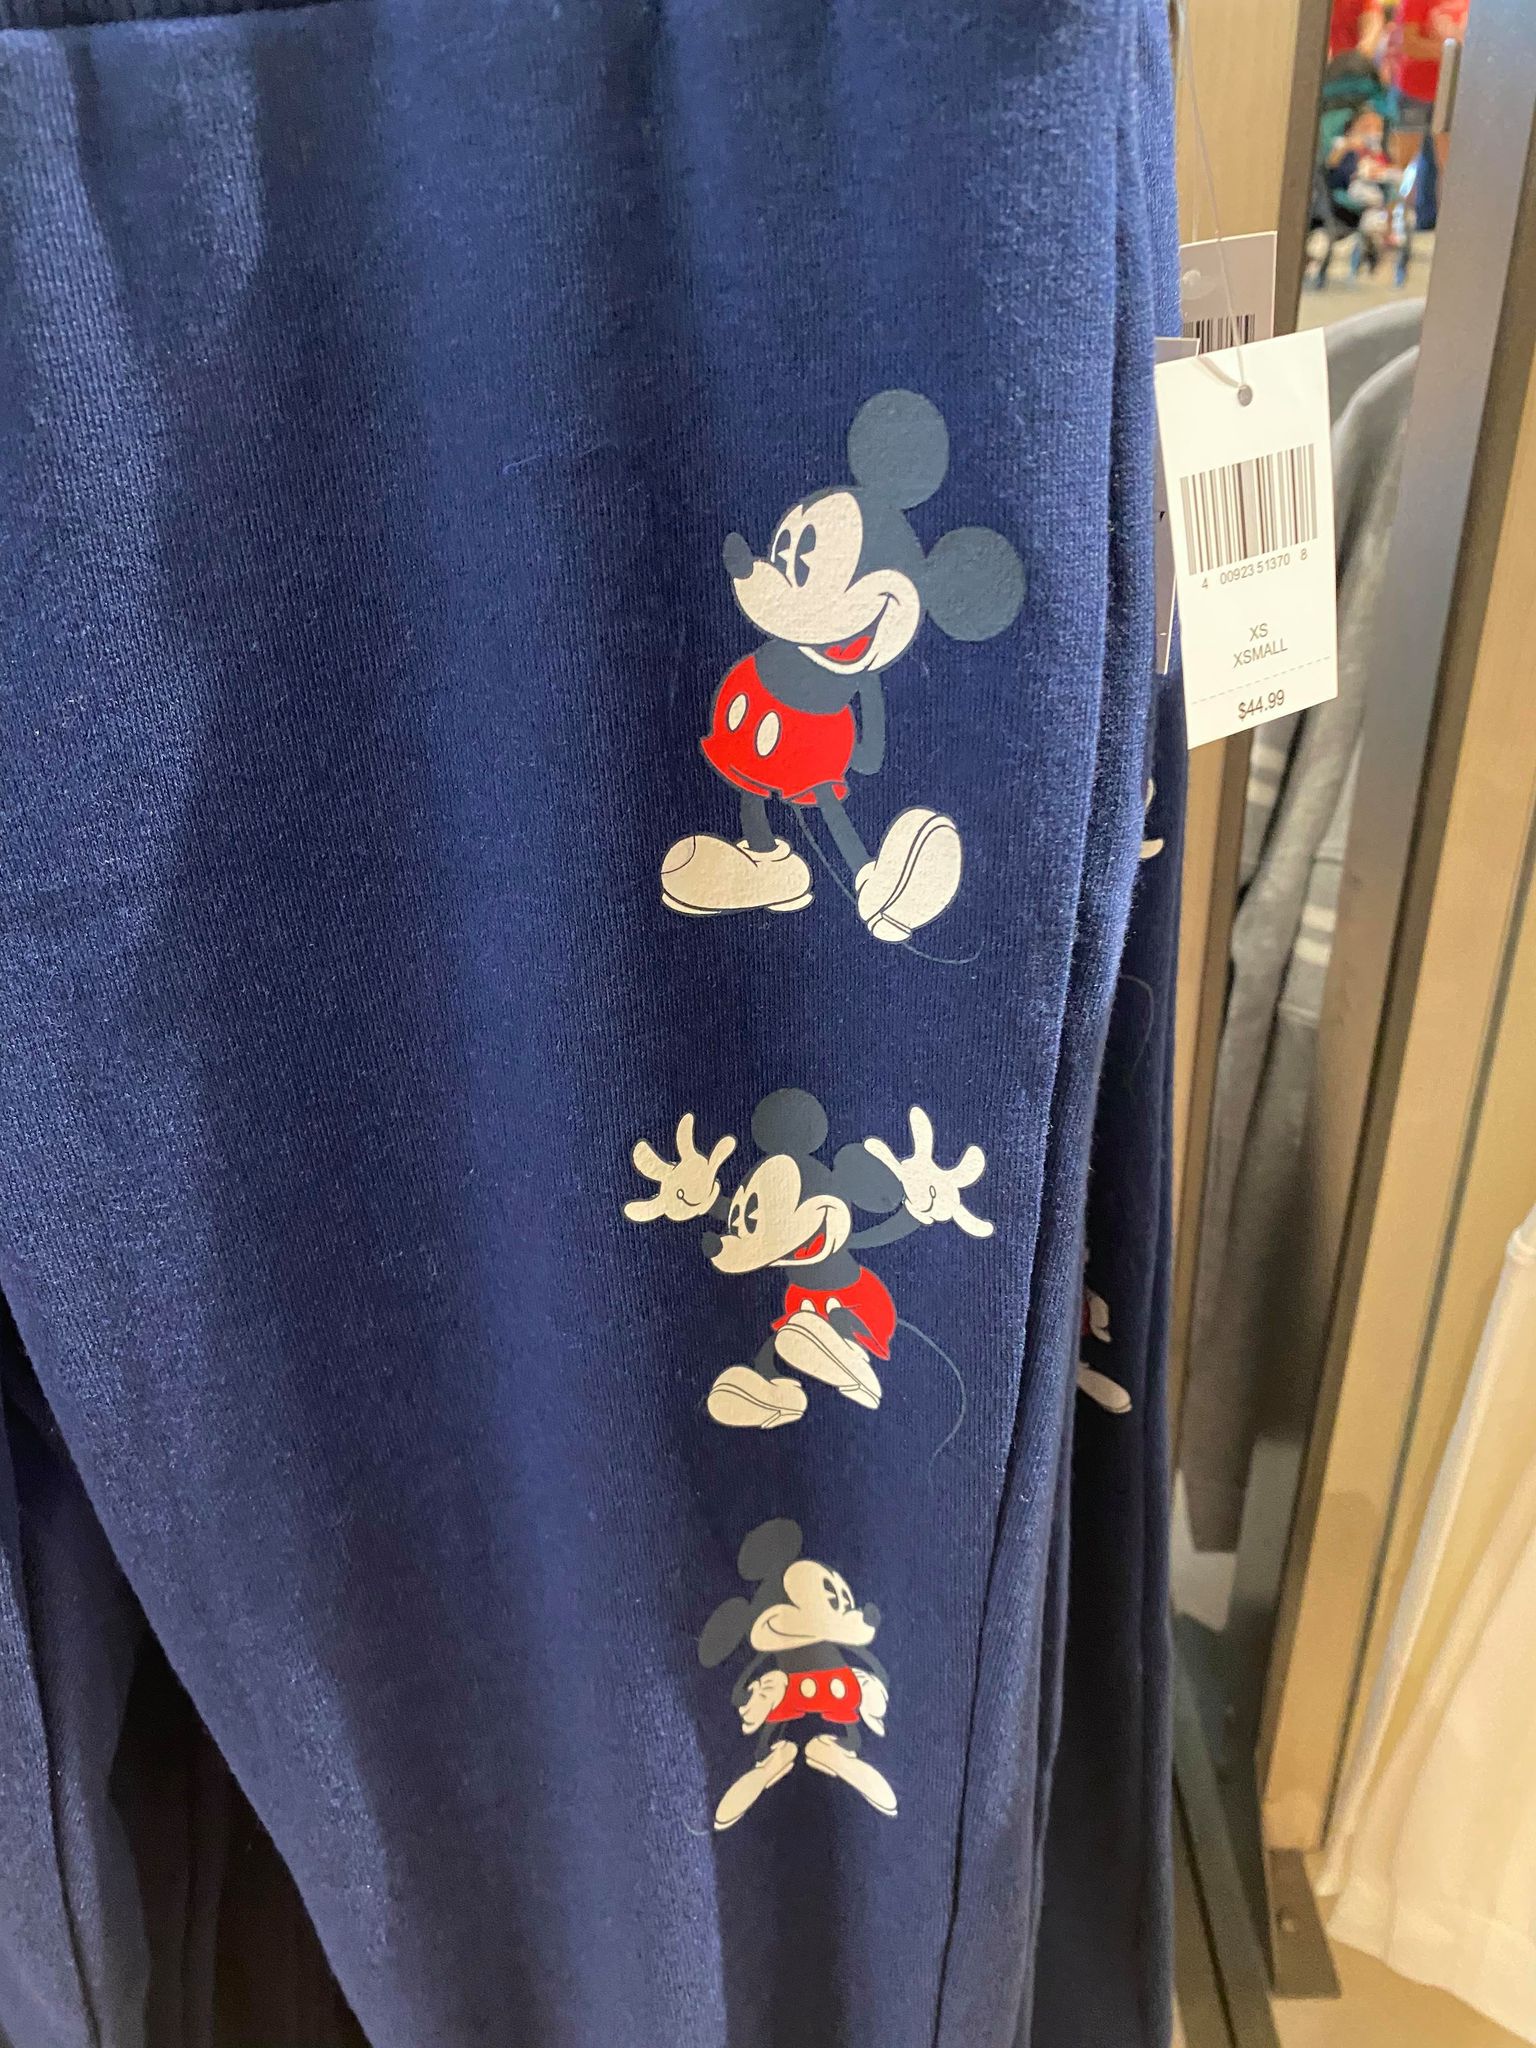 New Mickey Mouse Sweats Have Arrived At Walt Disney World - MickeyBlog.com